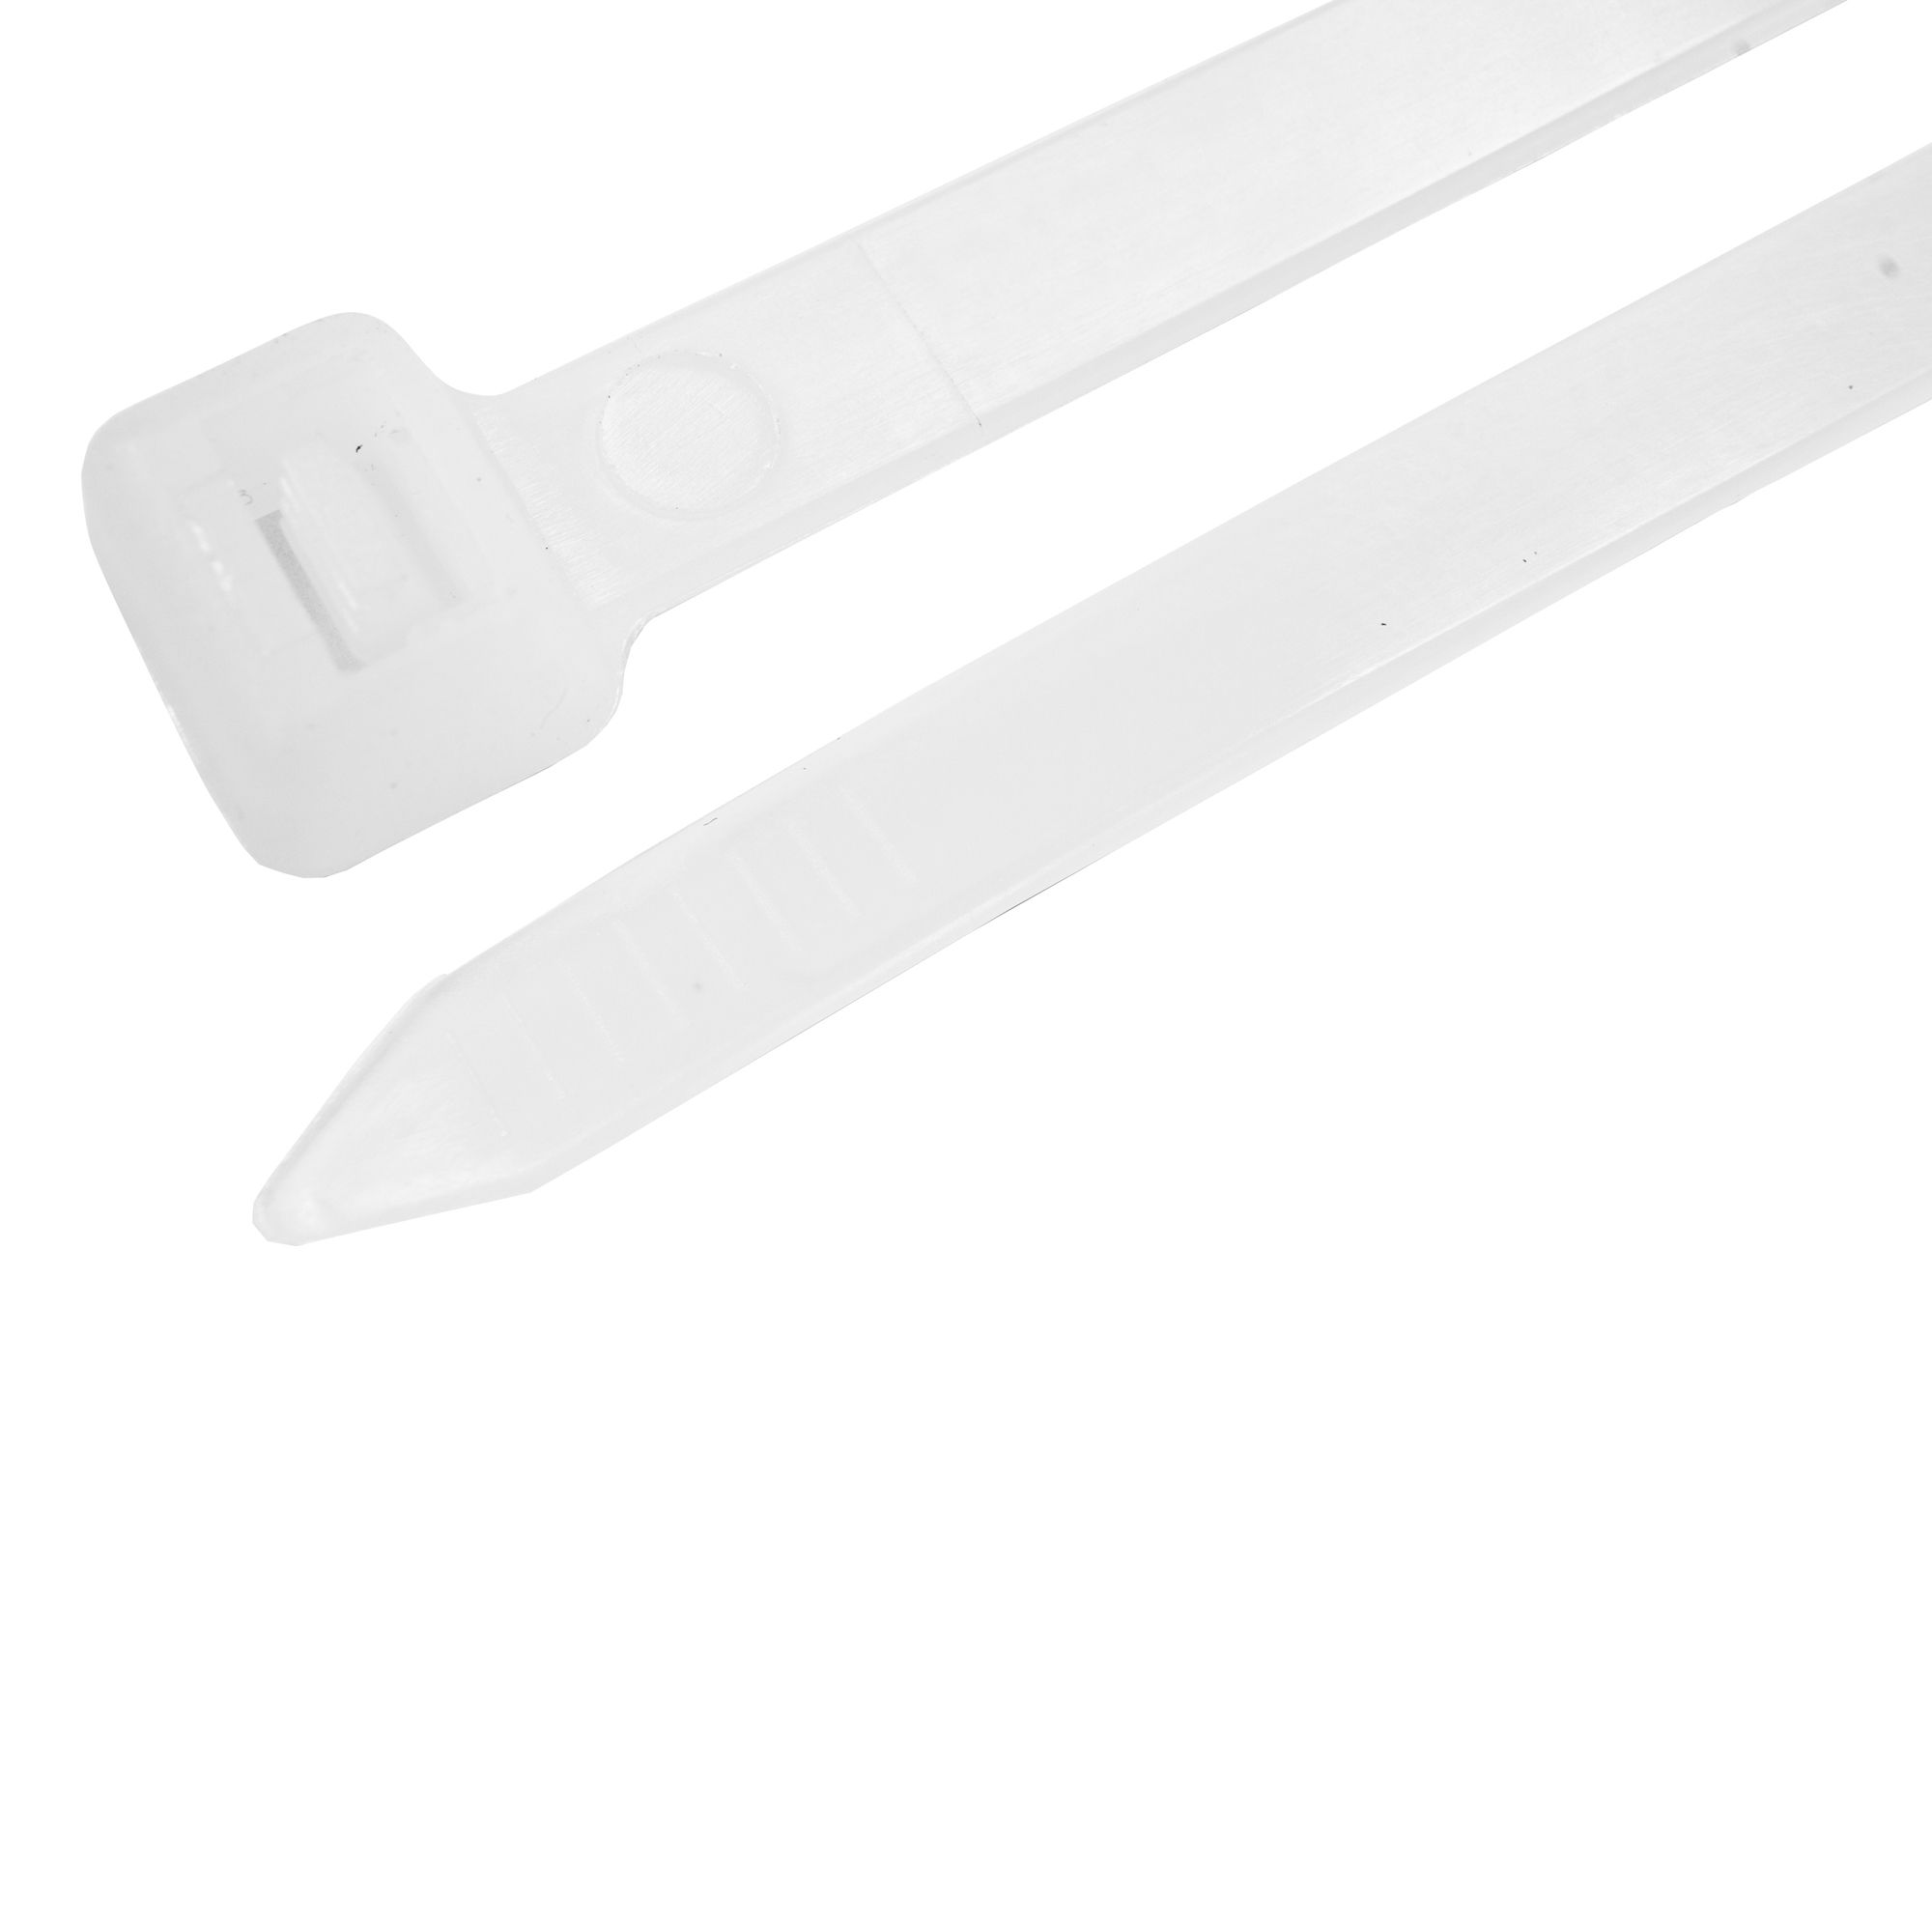 B&Q White Cable tie (L)370mm, Pack of 50